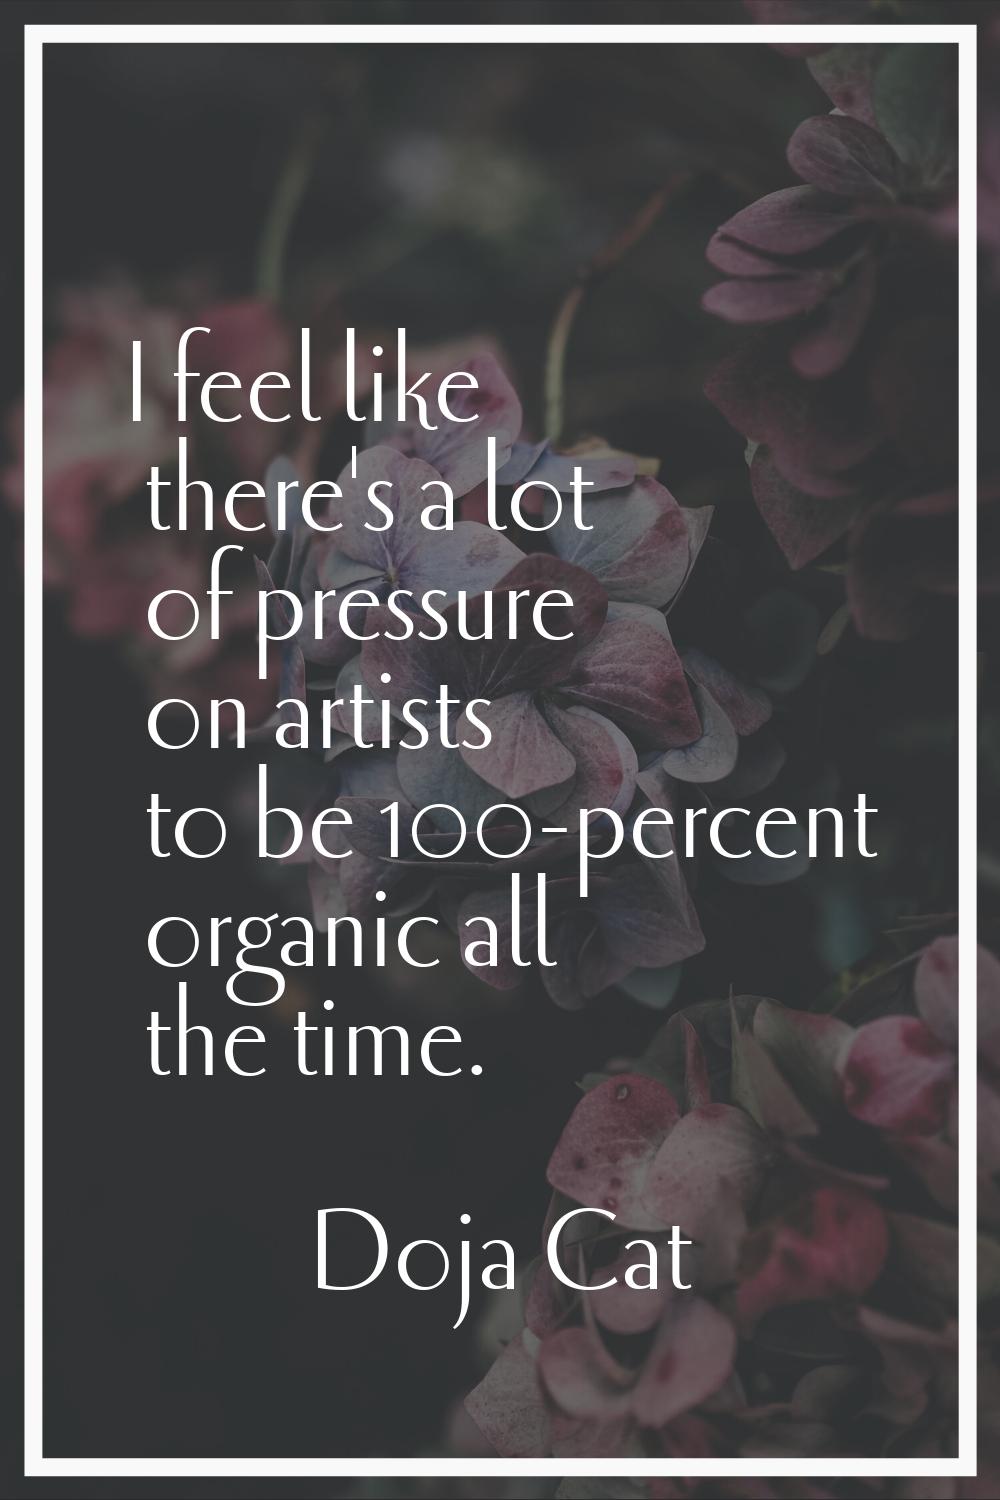 I feel like there's a lot of pressure on artists to be 100-percent organic all the time.